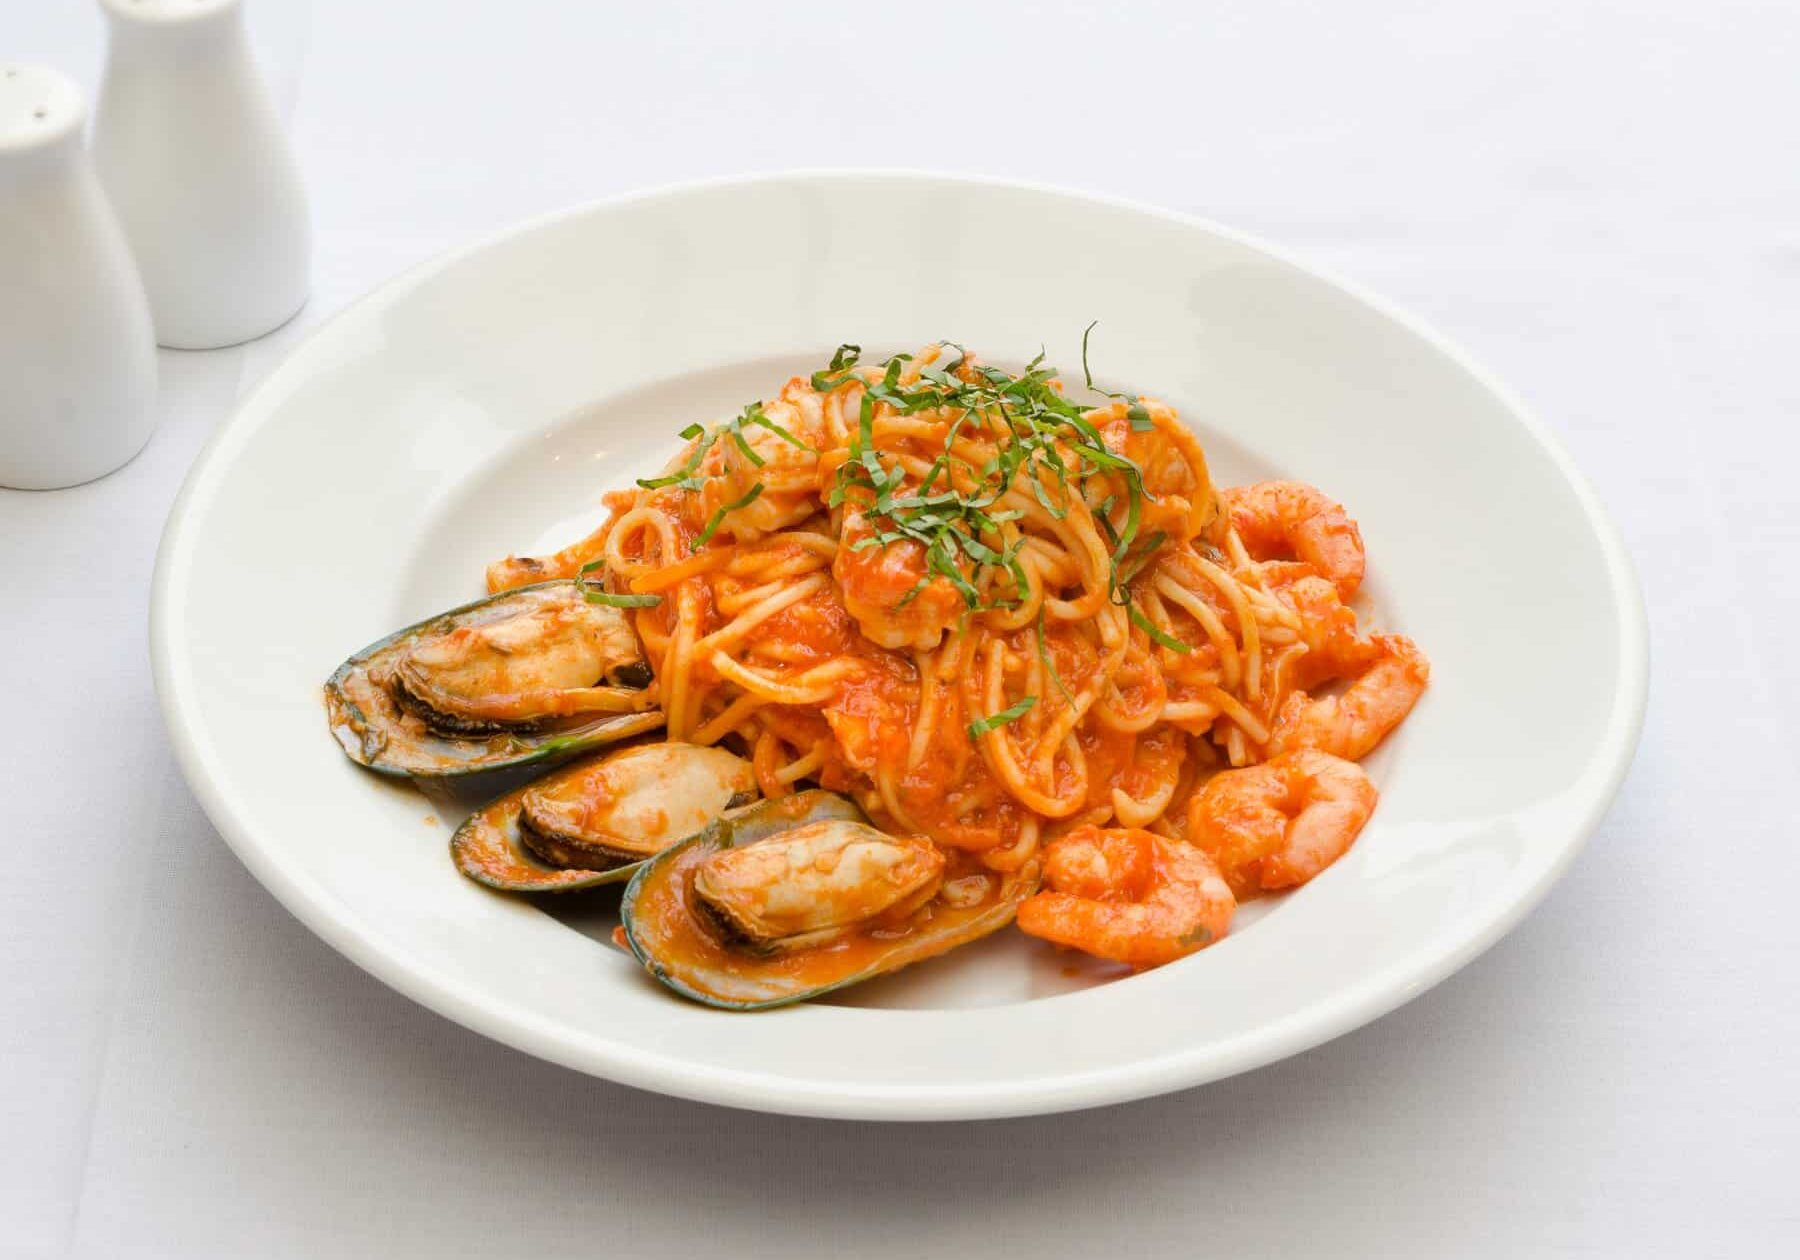 Seafood Pasta With A Red Tomato-Based Sauce